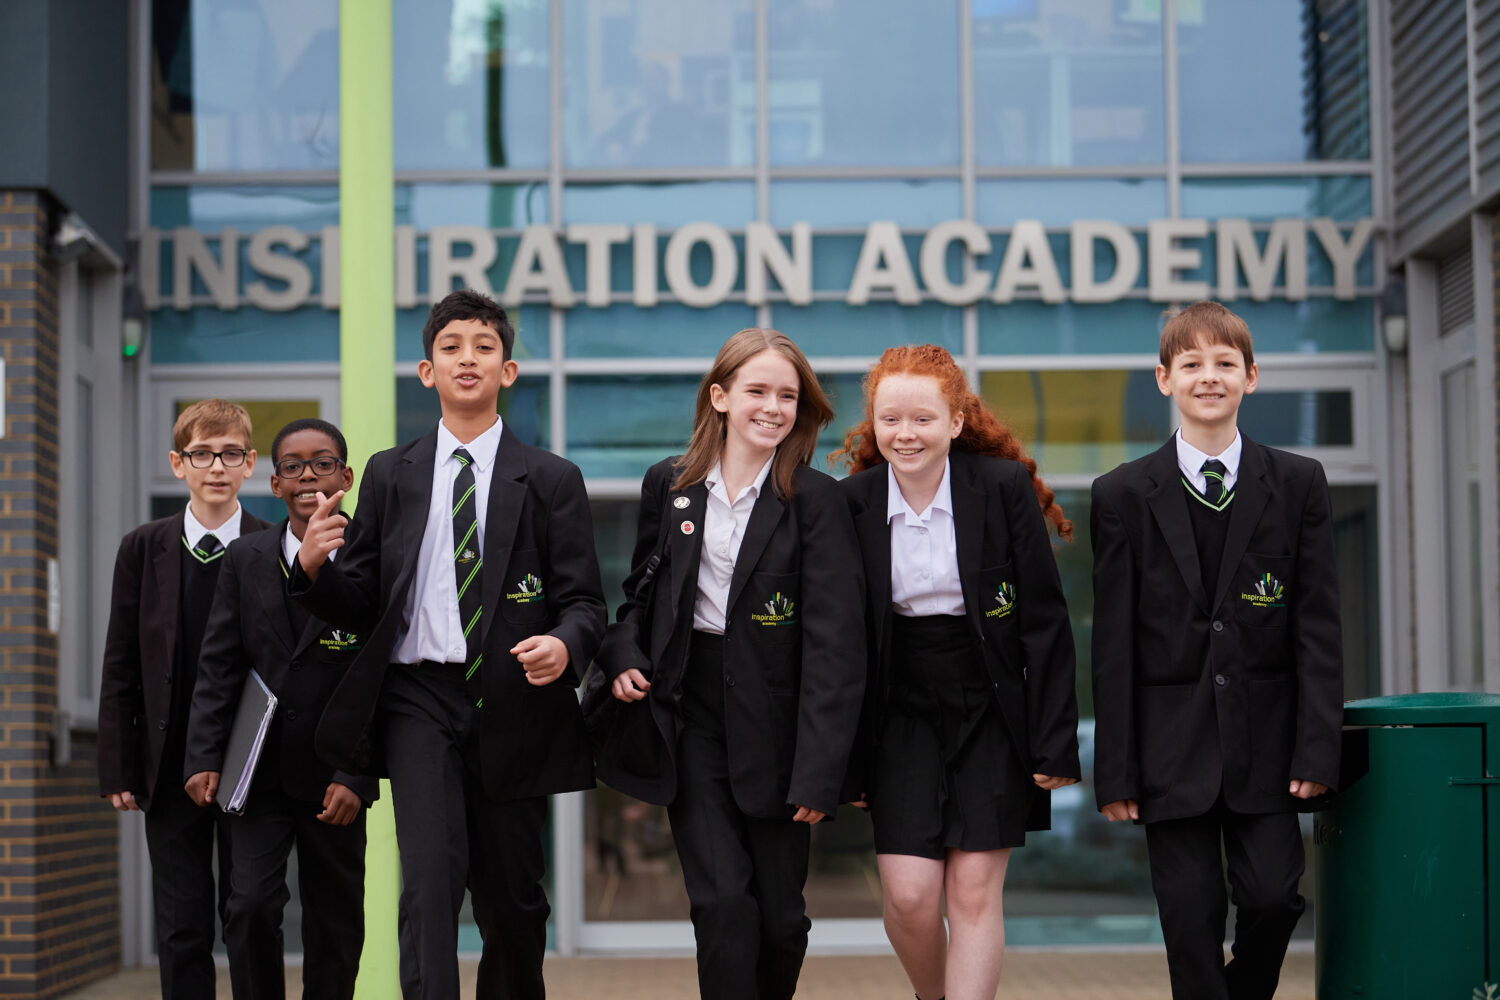 A group of six Inspiration Academy students are seen walking out of the building at the end of the day and towards the camera, with smiles on their faces.